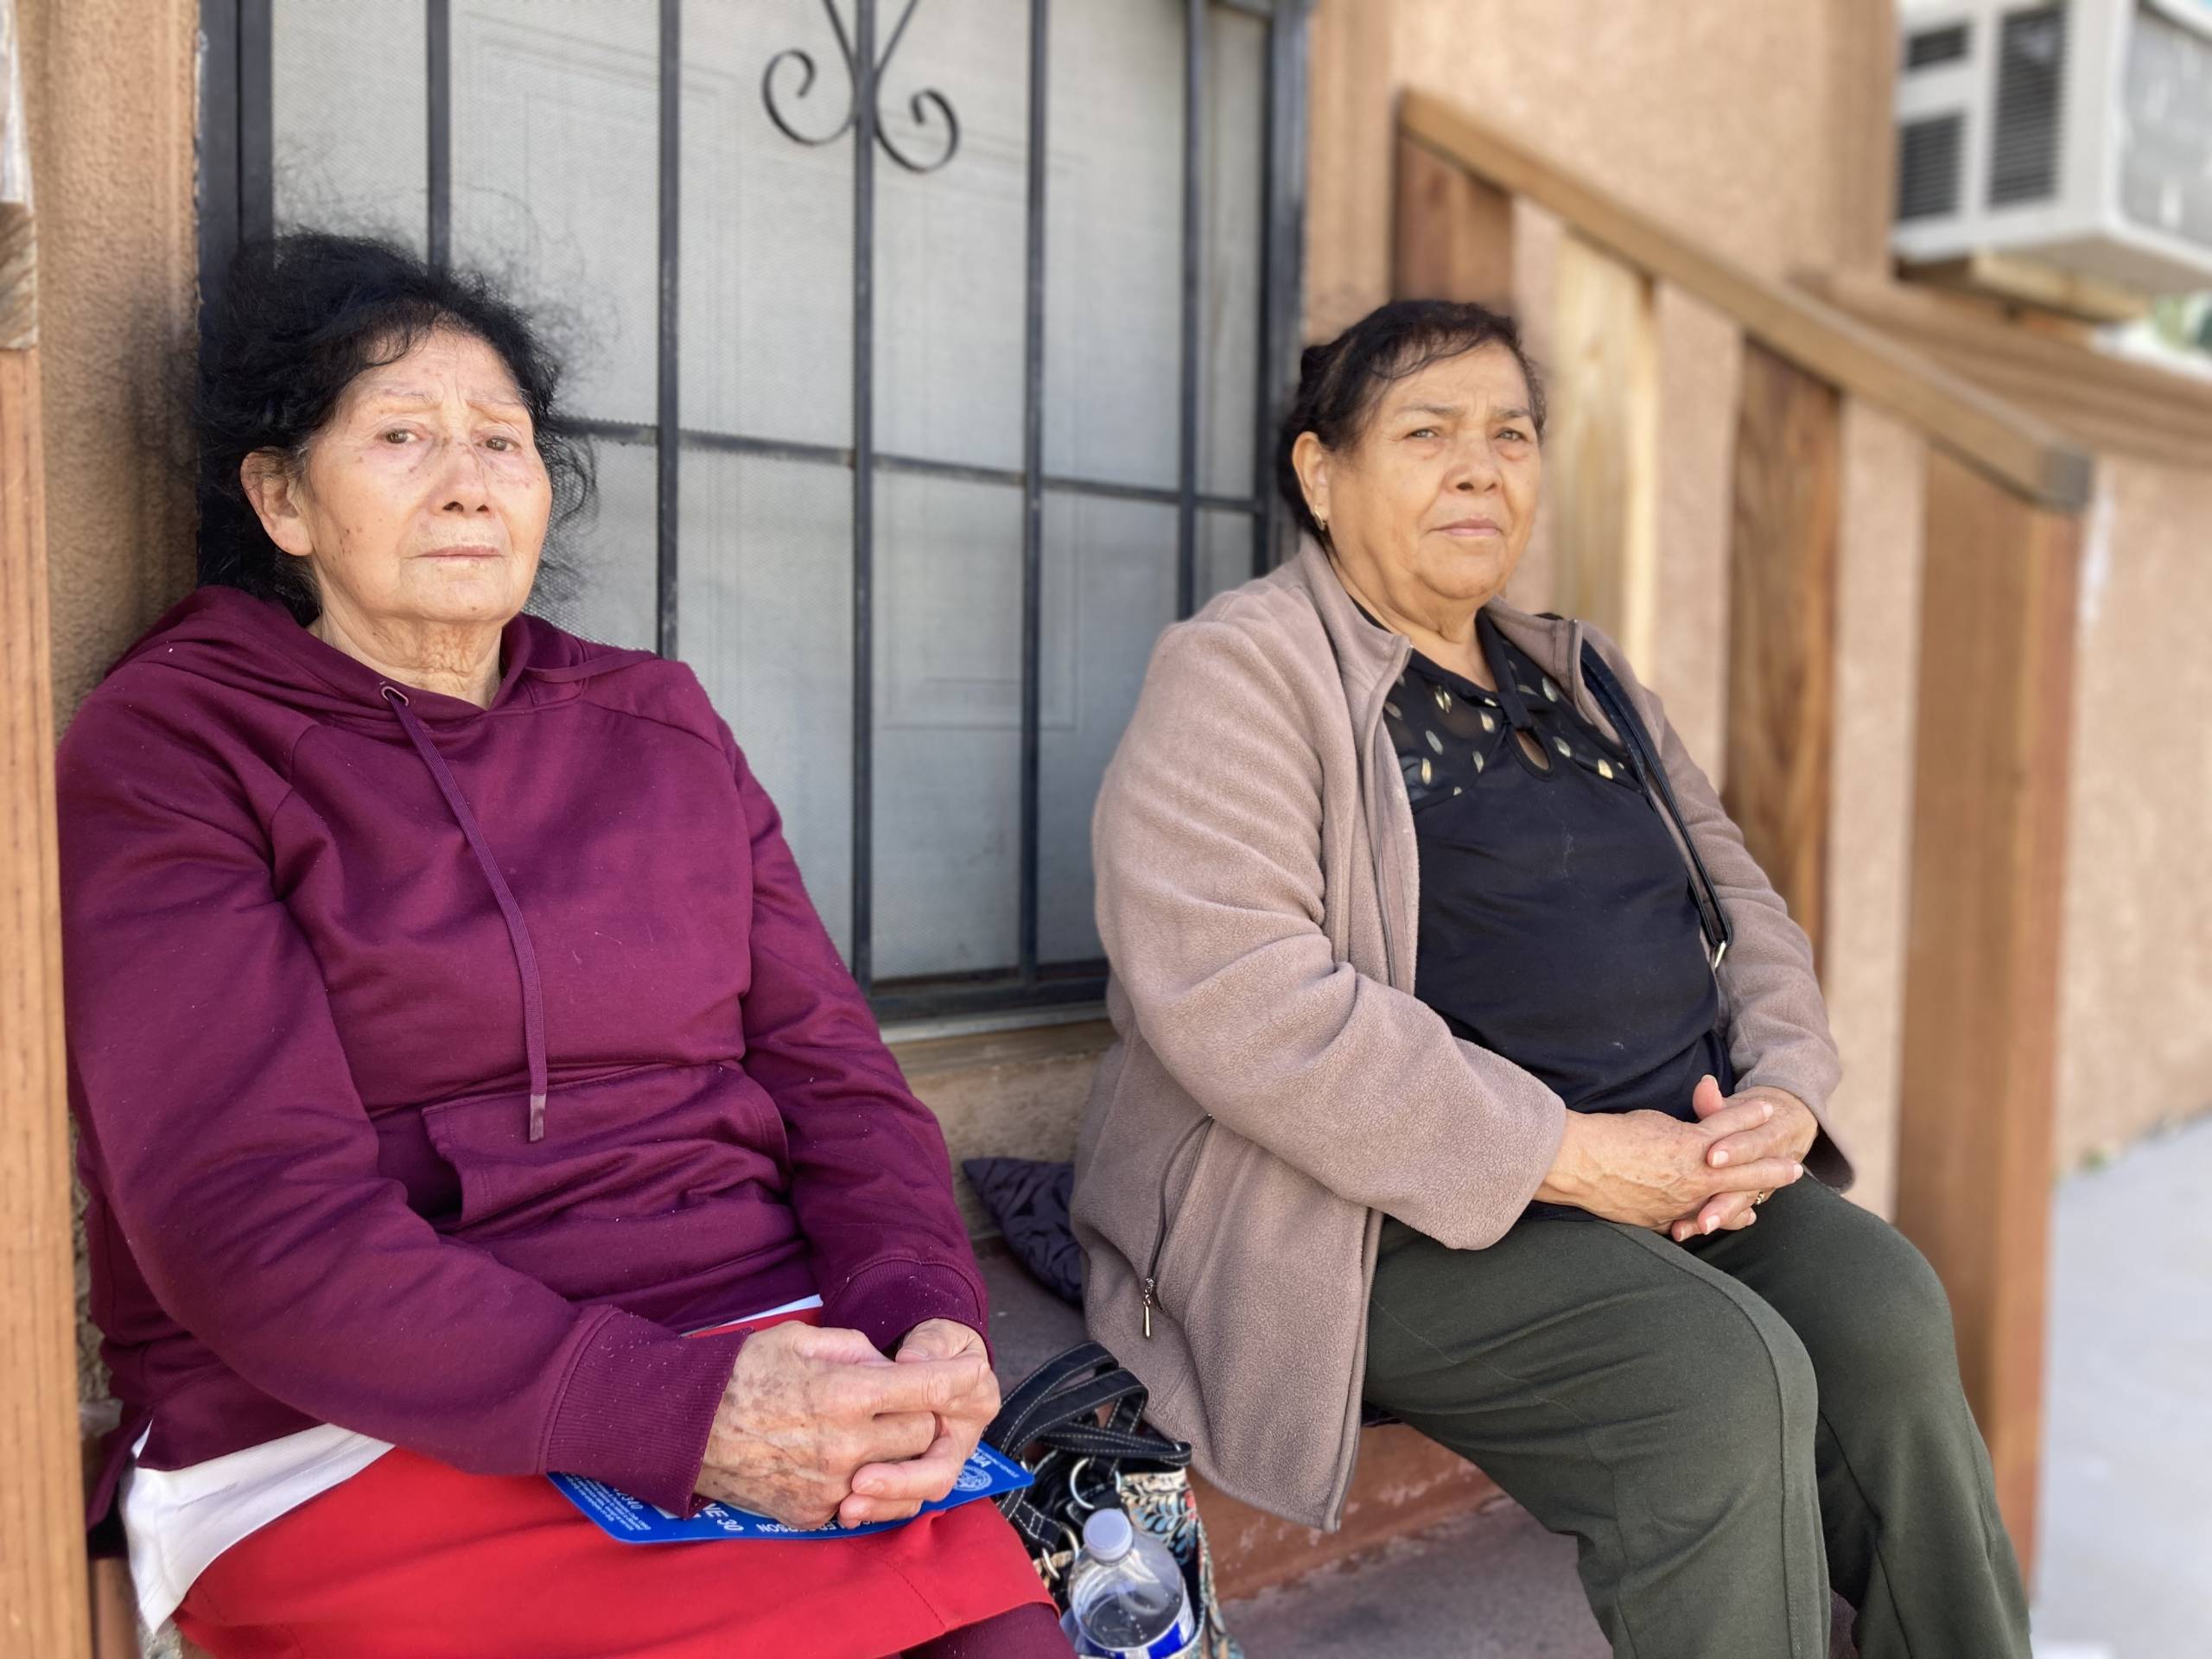 Two older women sit side by side on the steps to an apartment's front door. Each woman has her hands folded neatly on their laps. They look serious, tired, concerned.